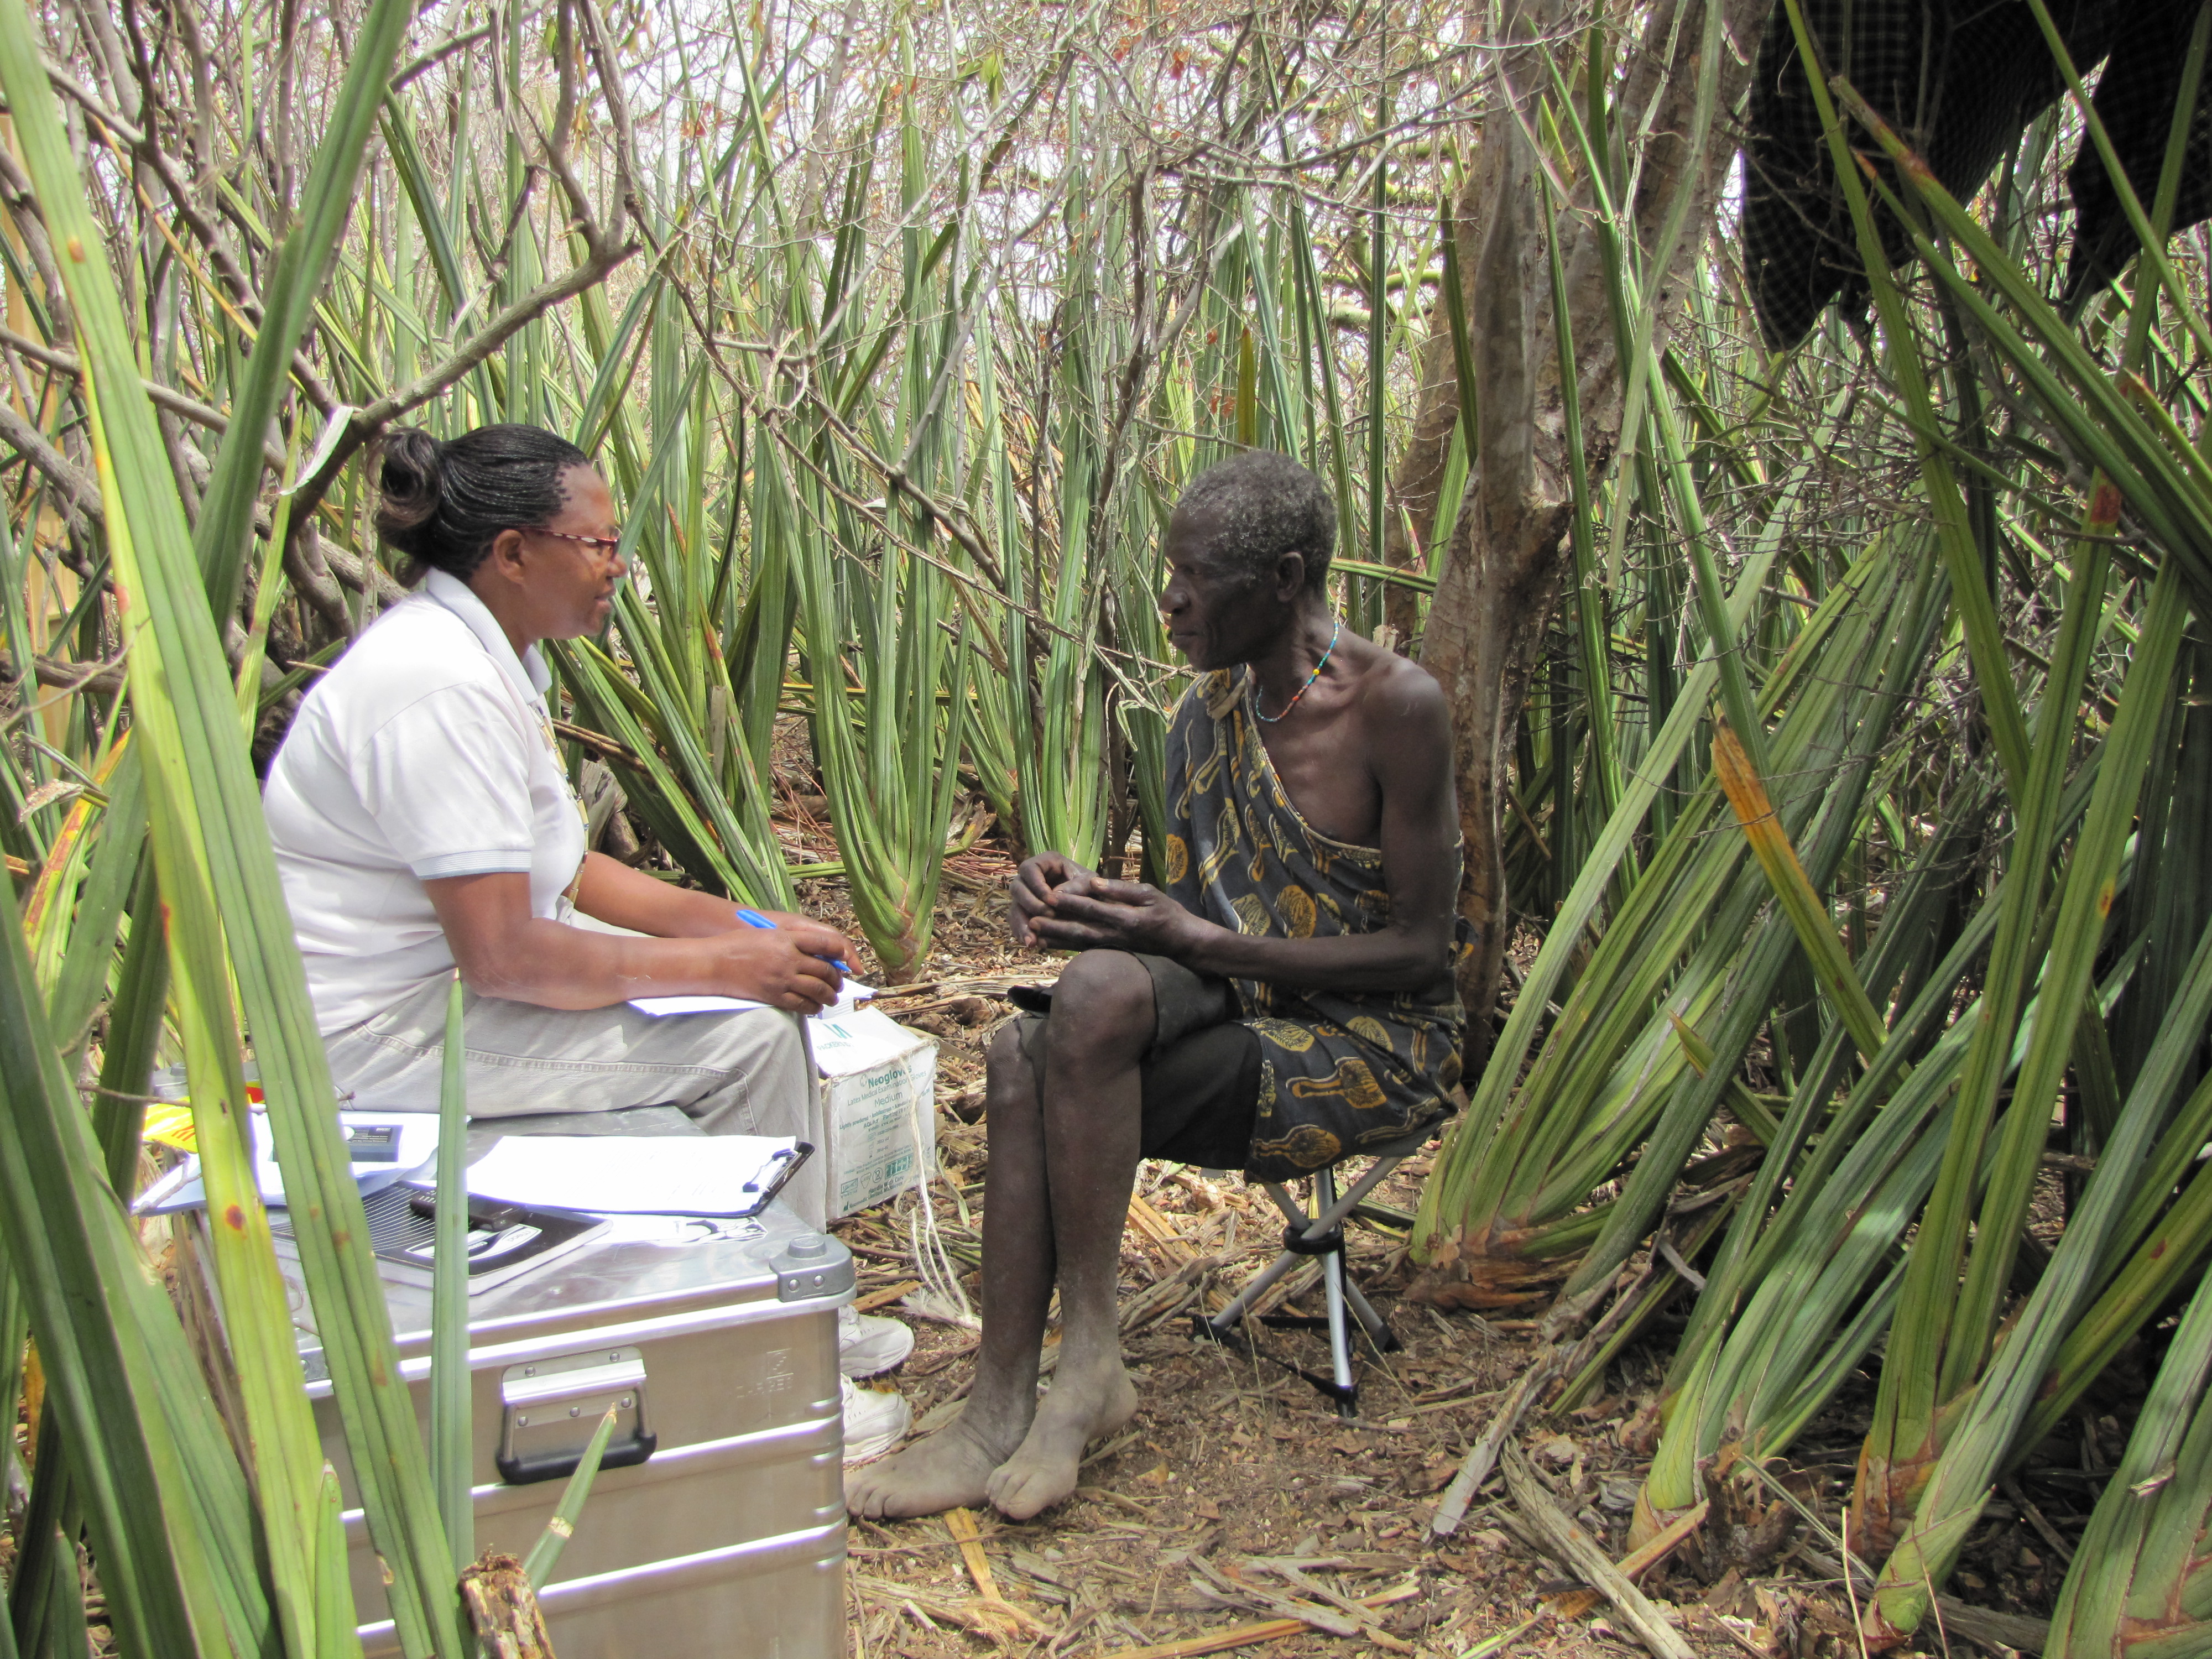 Person in white nurses outfit sits opposite person in traditional dress amid thick vegetation